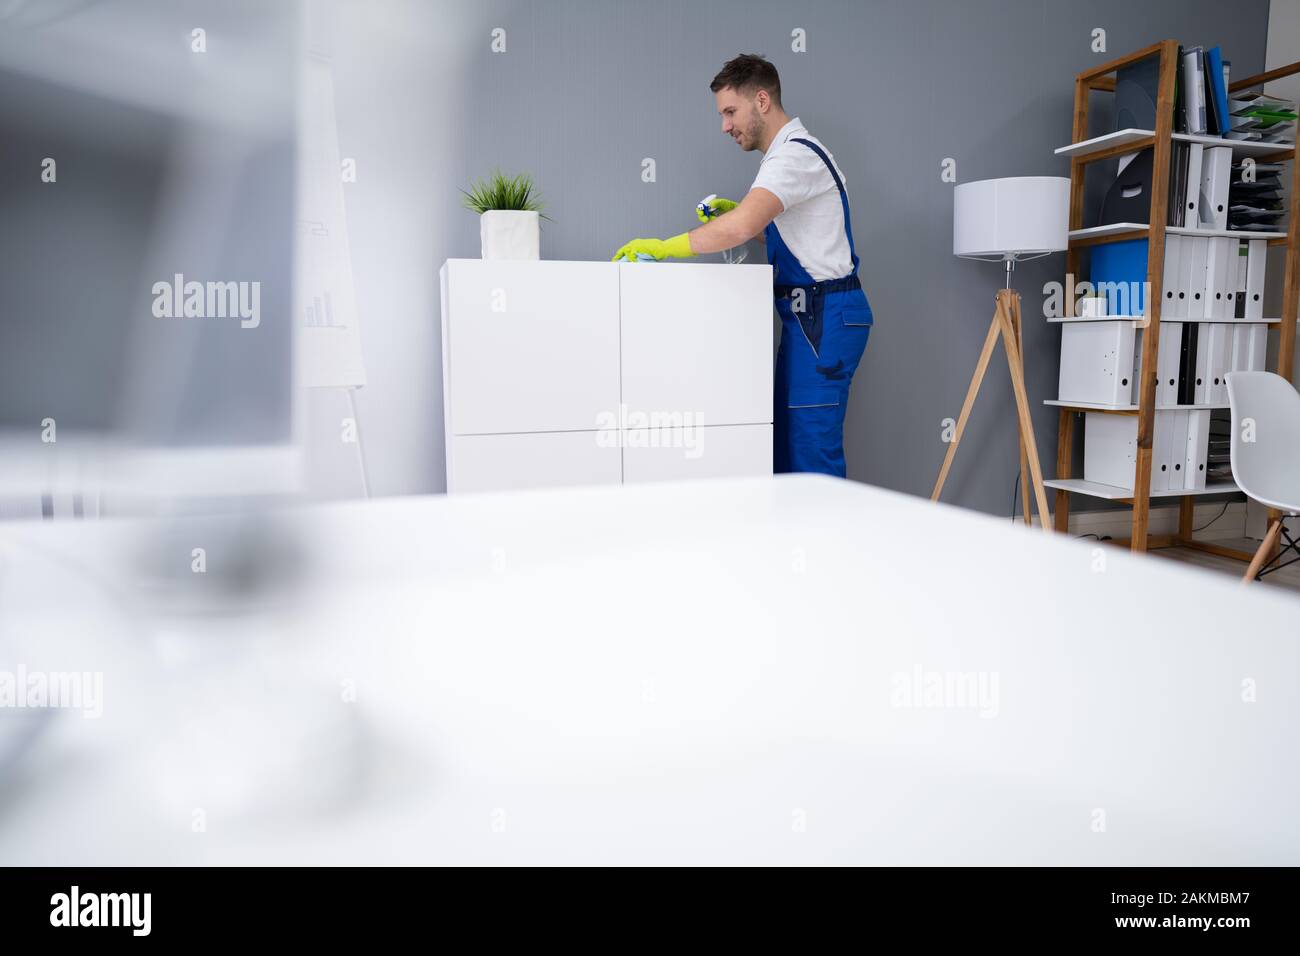 Mid Adult Male Worker Cleaning Shelf With Spray And Sponge At Office Stock Photo